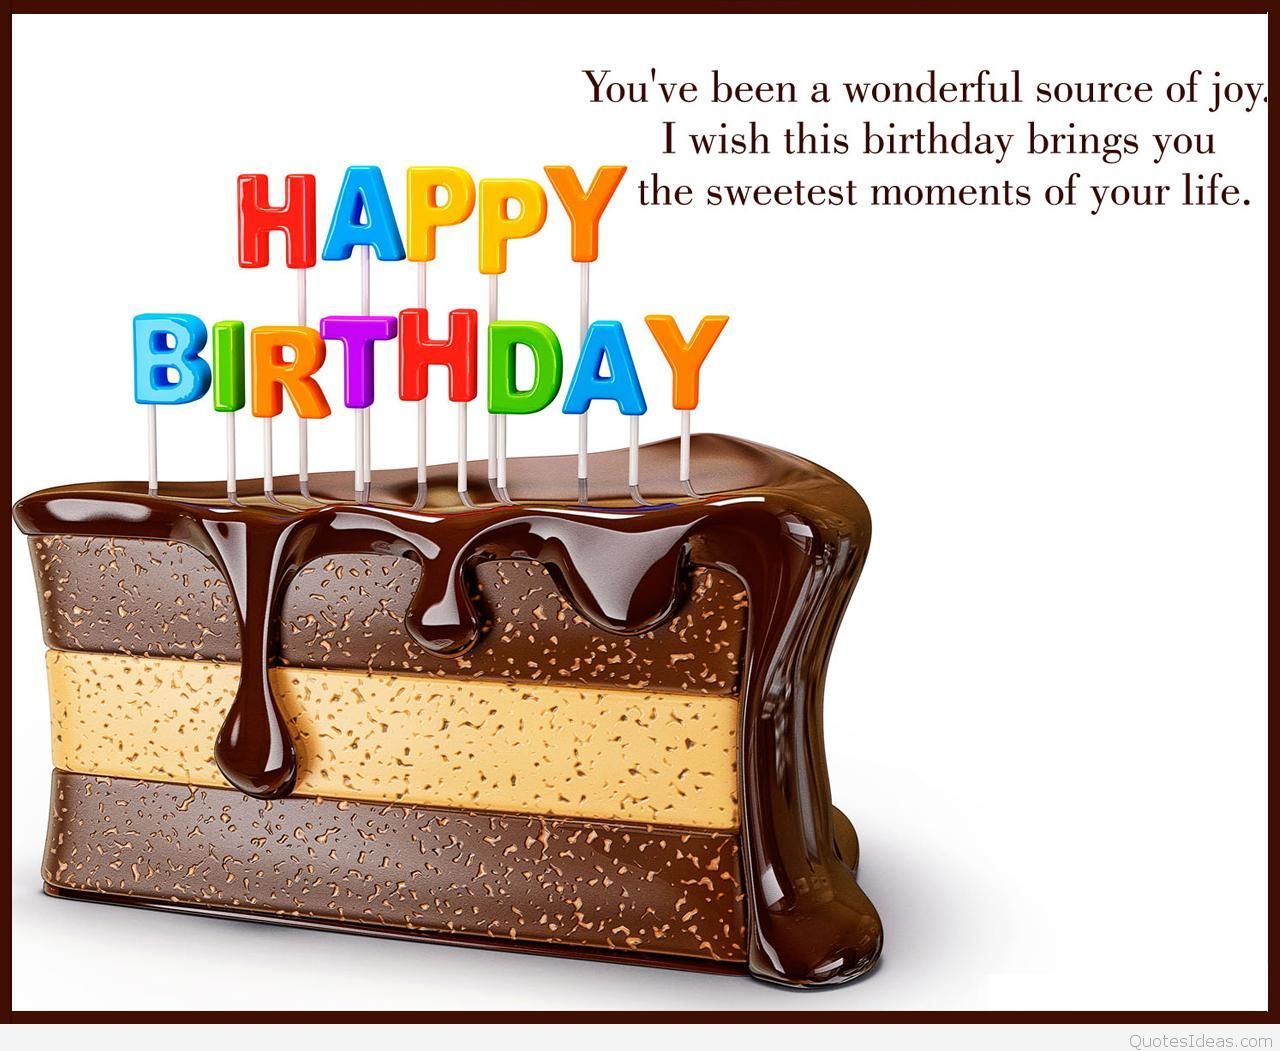 Best cute happy birthday messages, cards wallpaper